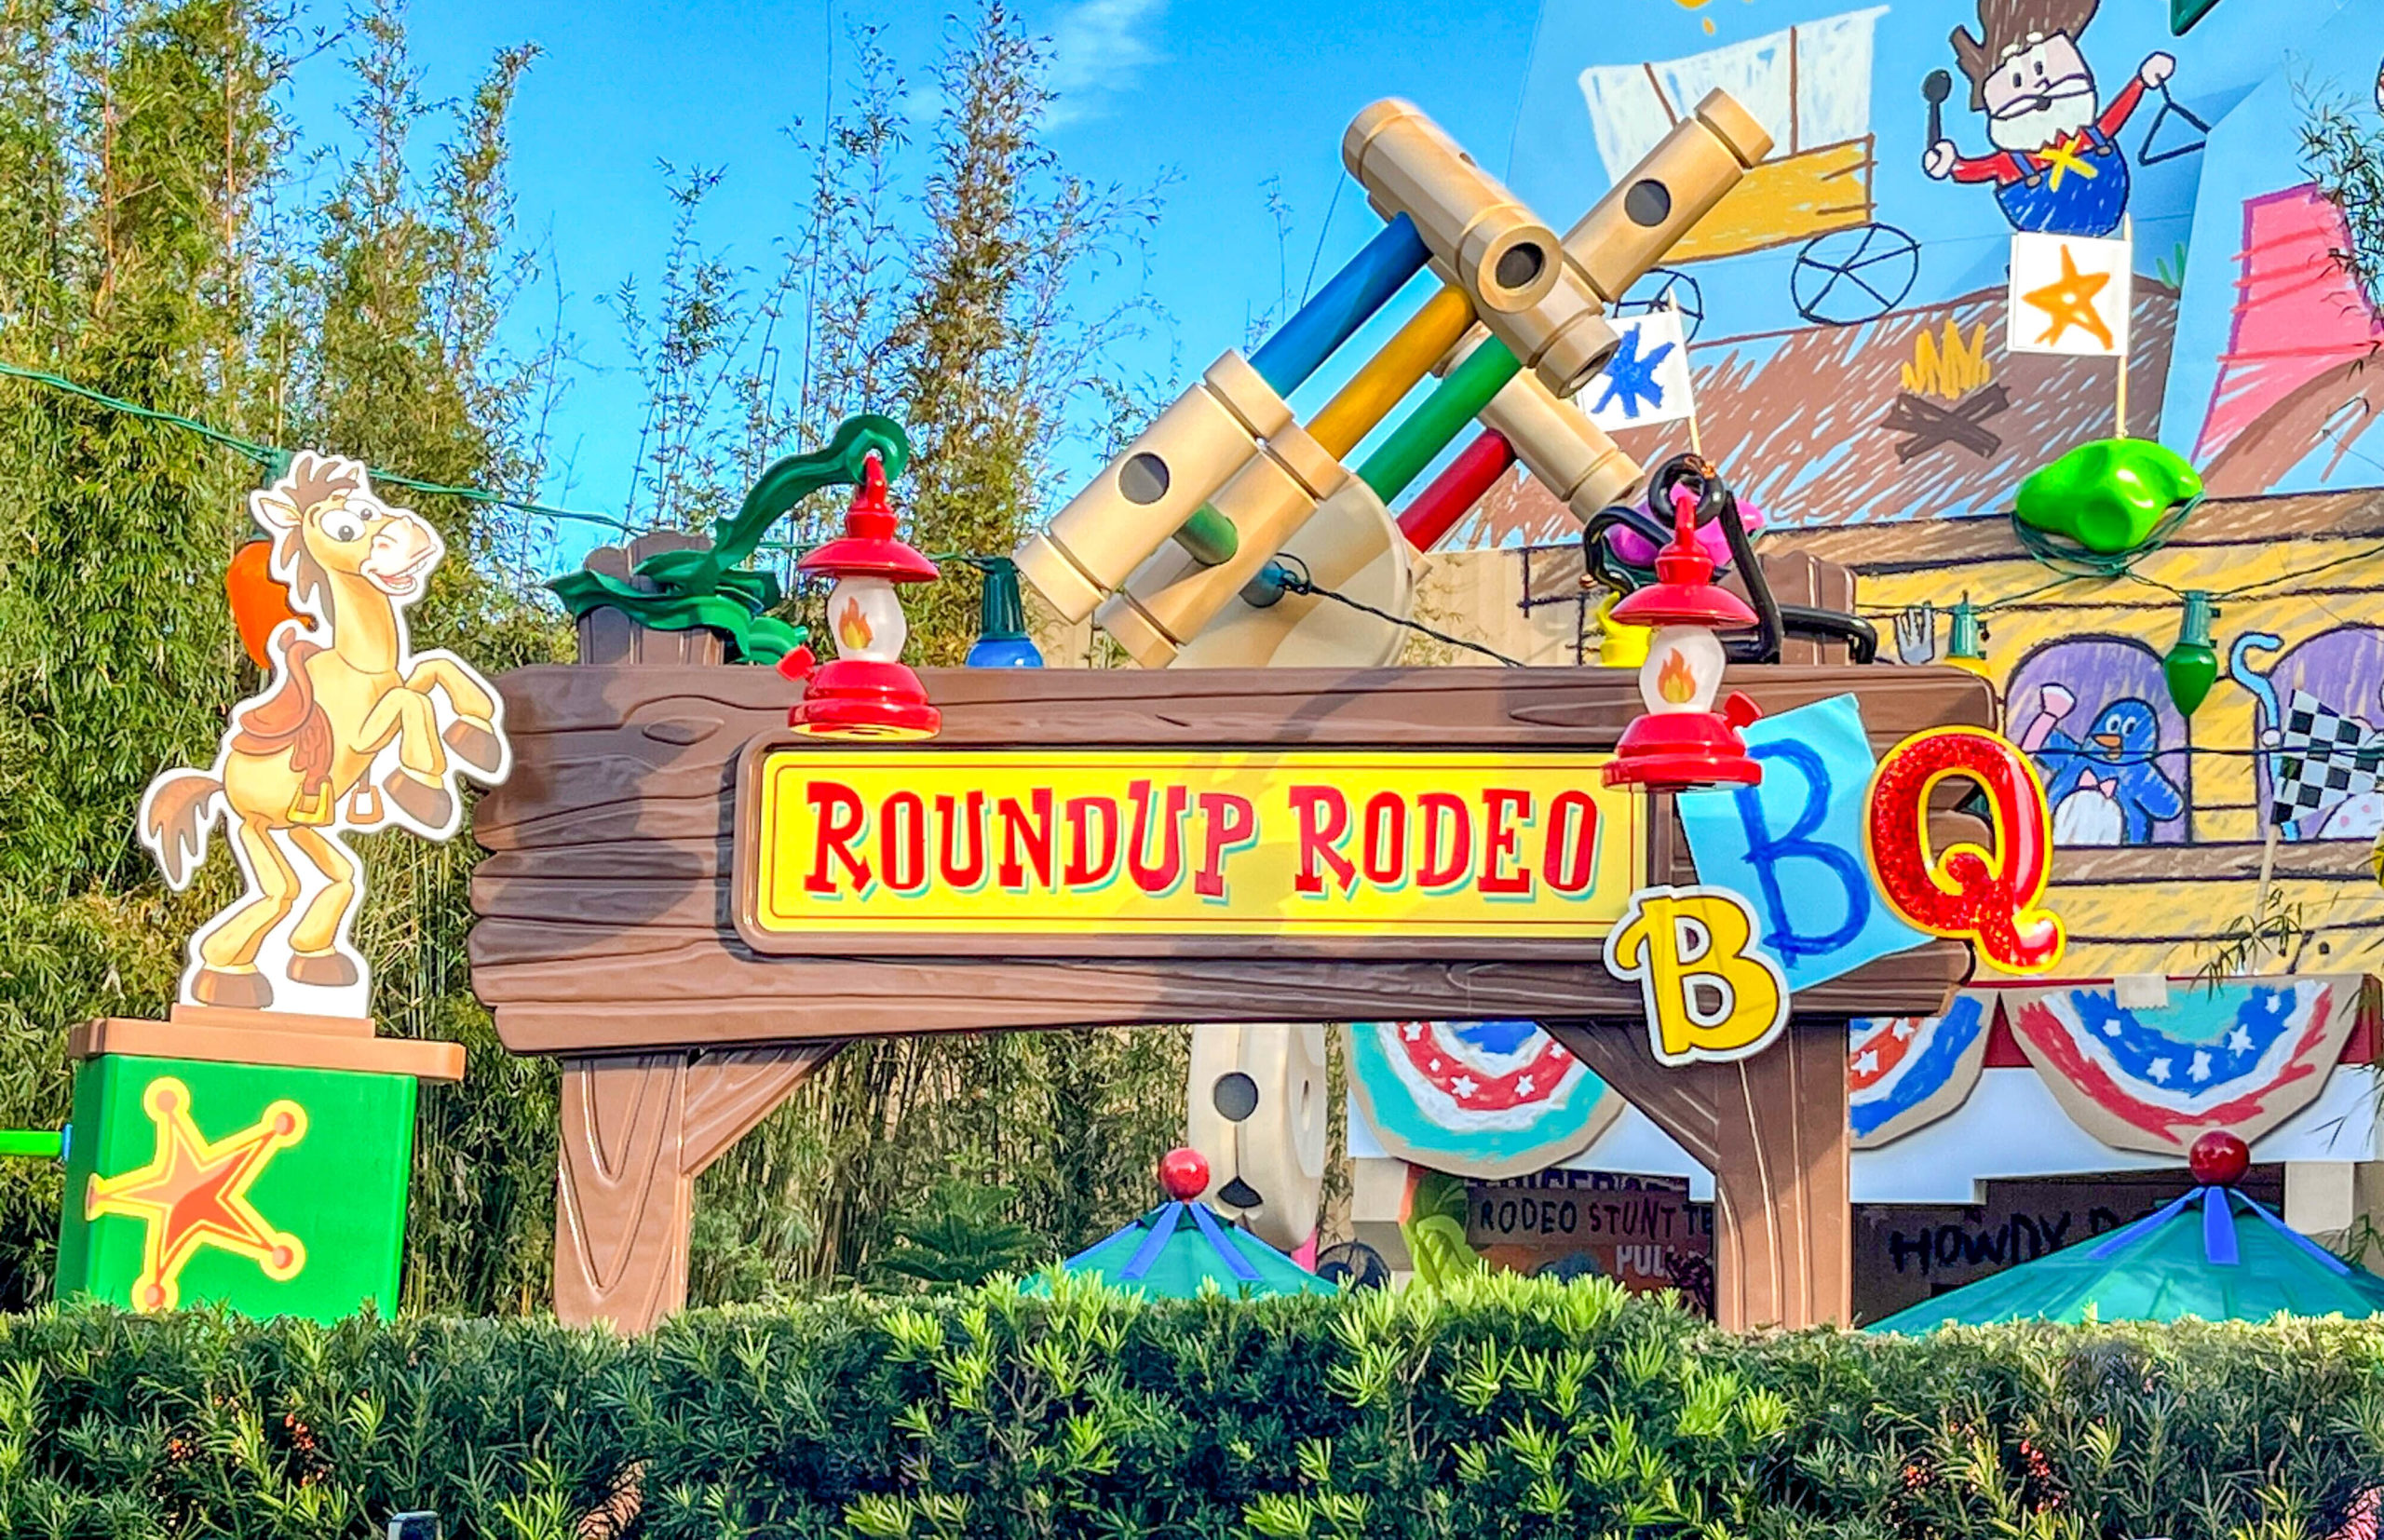 Roundup Rodeo BBQ sign